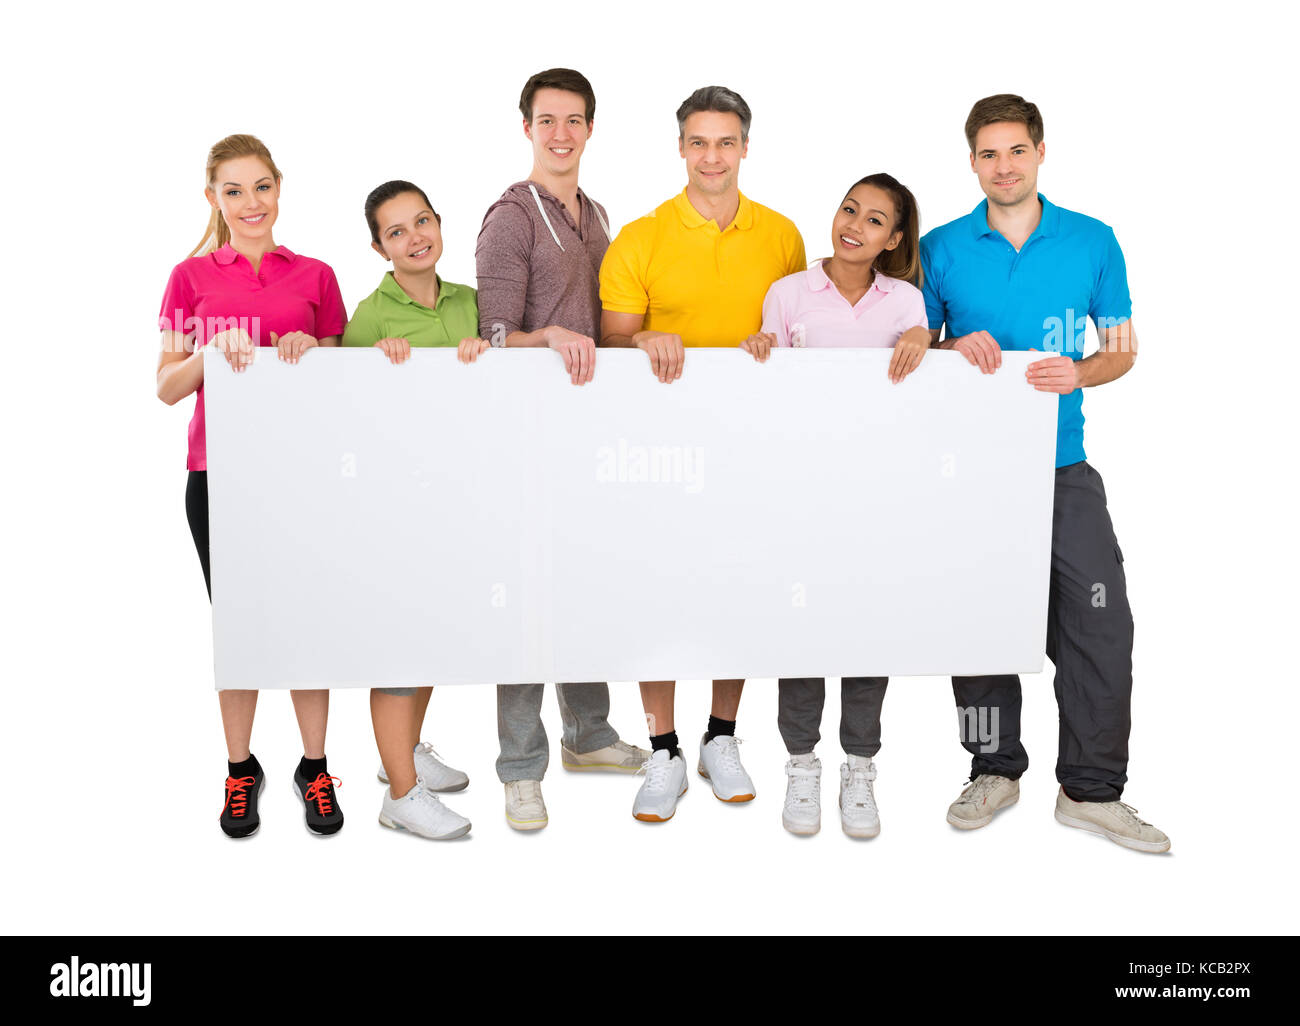 Group Of Smiling People Holding Blank Banner In Front Of A White Background  Stock Photo - Alamy